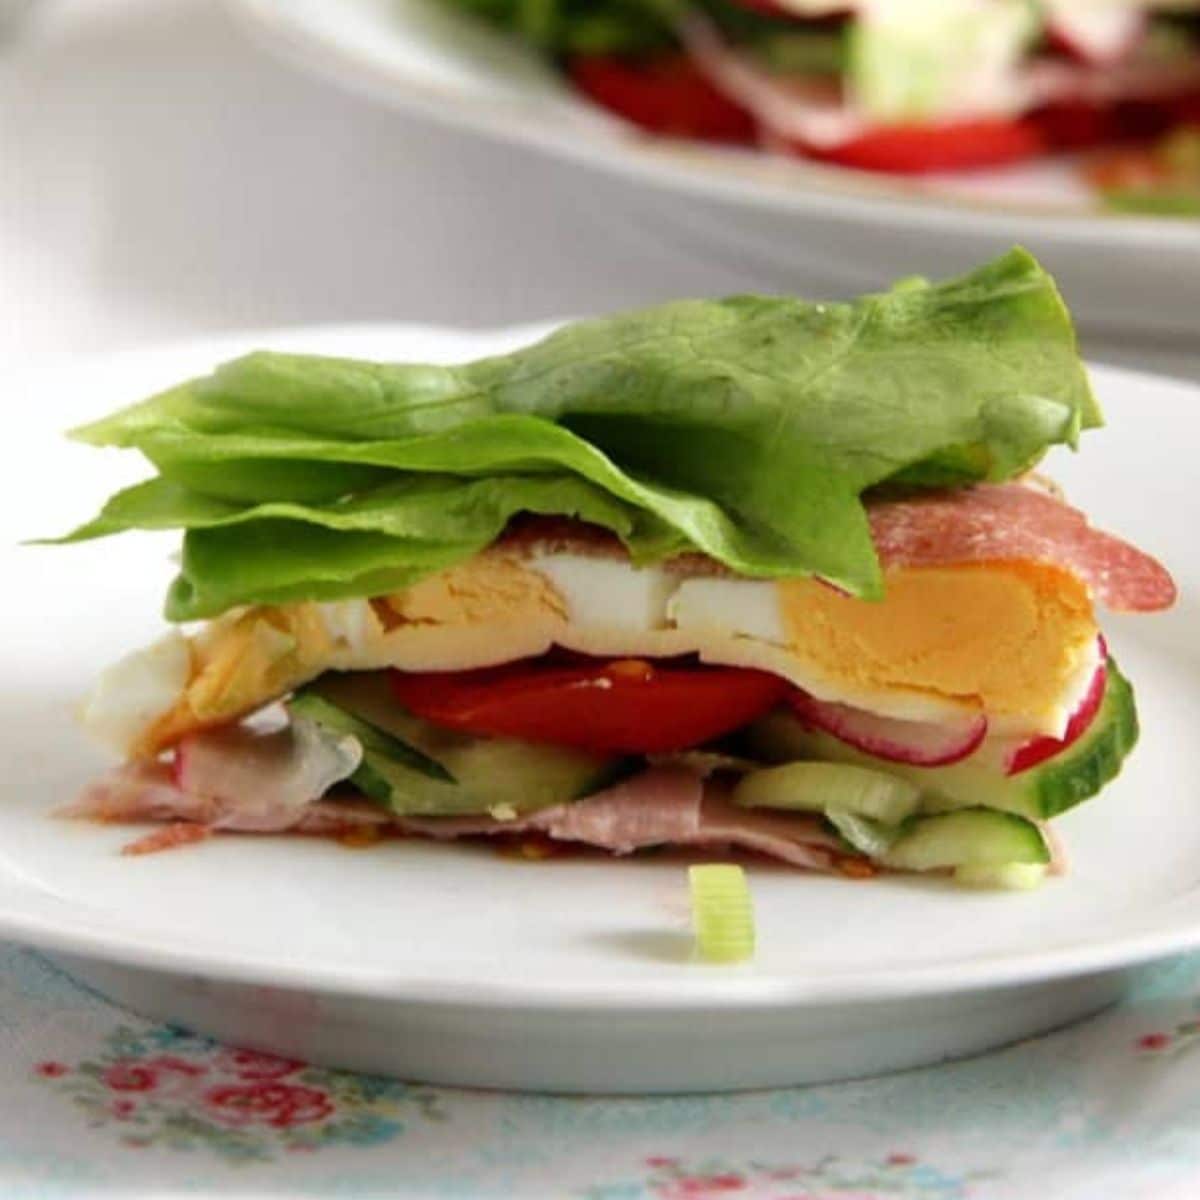 salad cake with layers of lettuce, tomatoes, deli meats, cheese slices and hard-boiled eggs on a small plate.